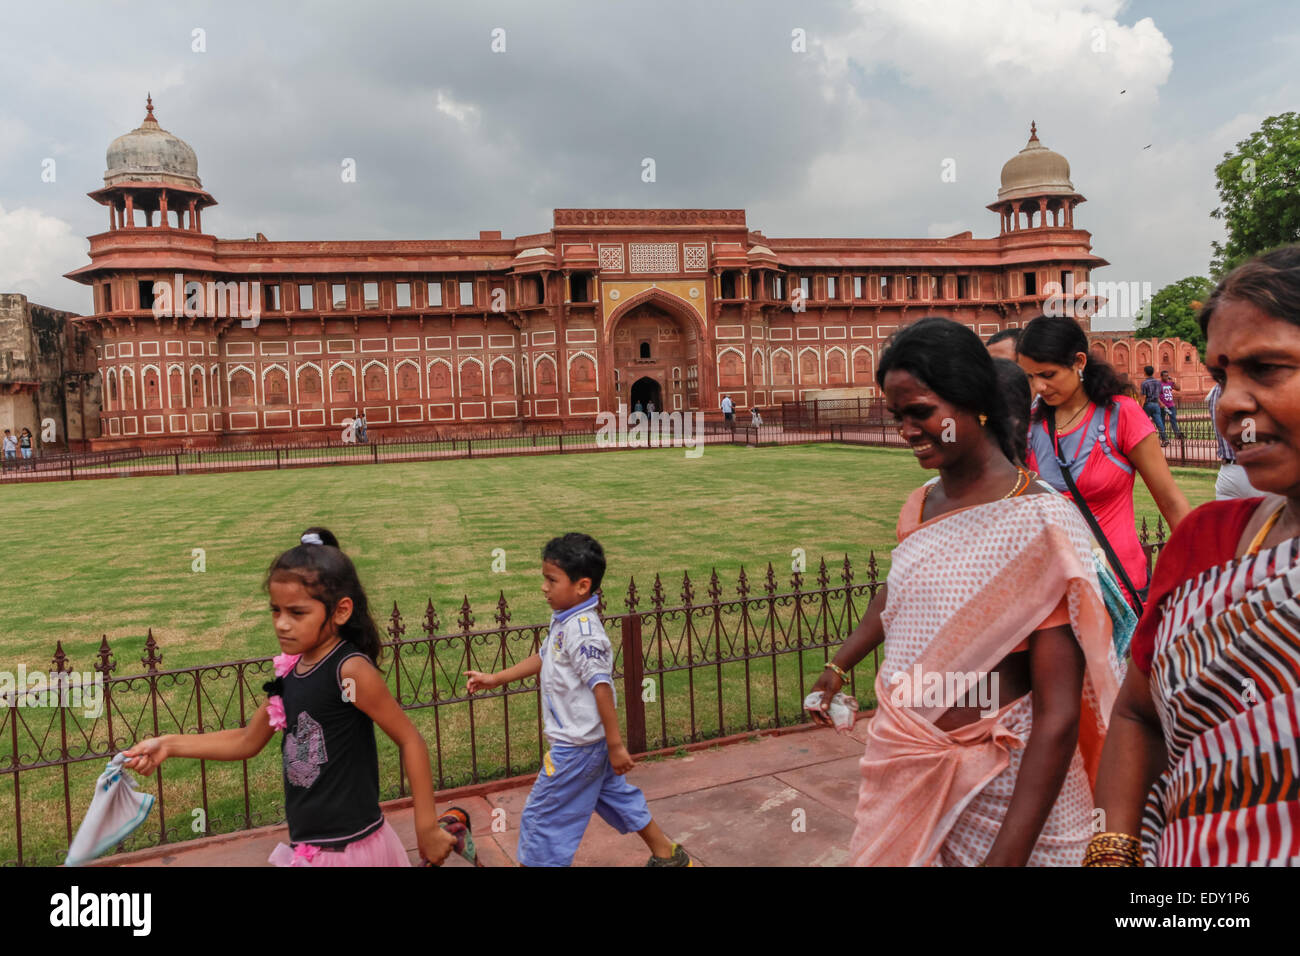 Women and children passing in front of  Jahangir Mahal, inside Agra Fort complex, Uttar Pradesh, India. Stock Photo